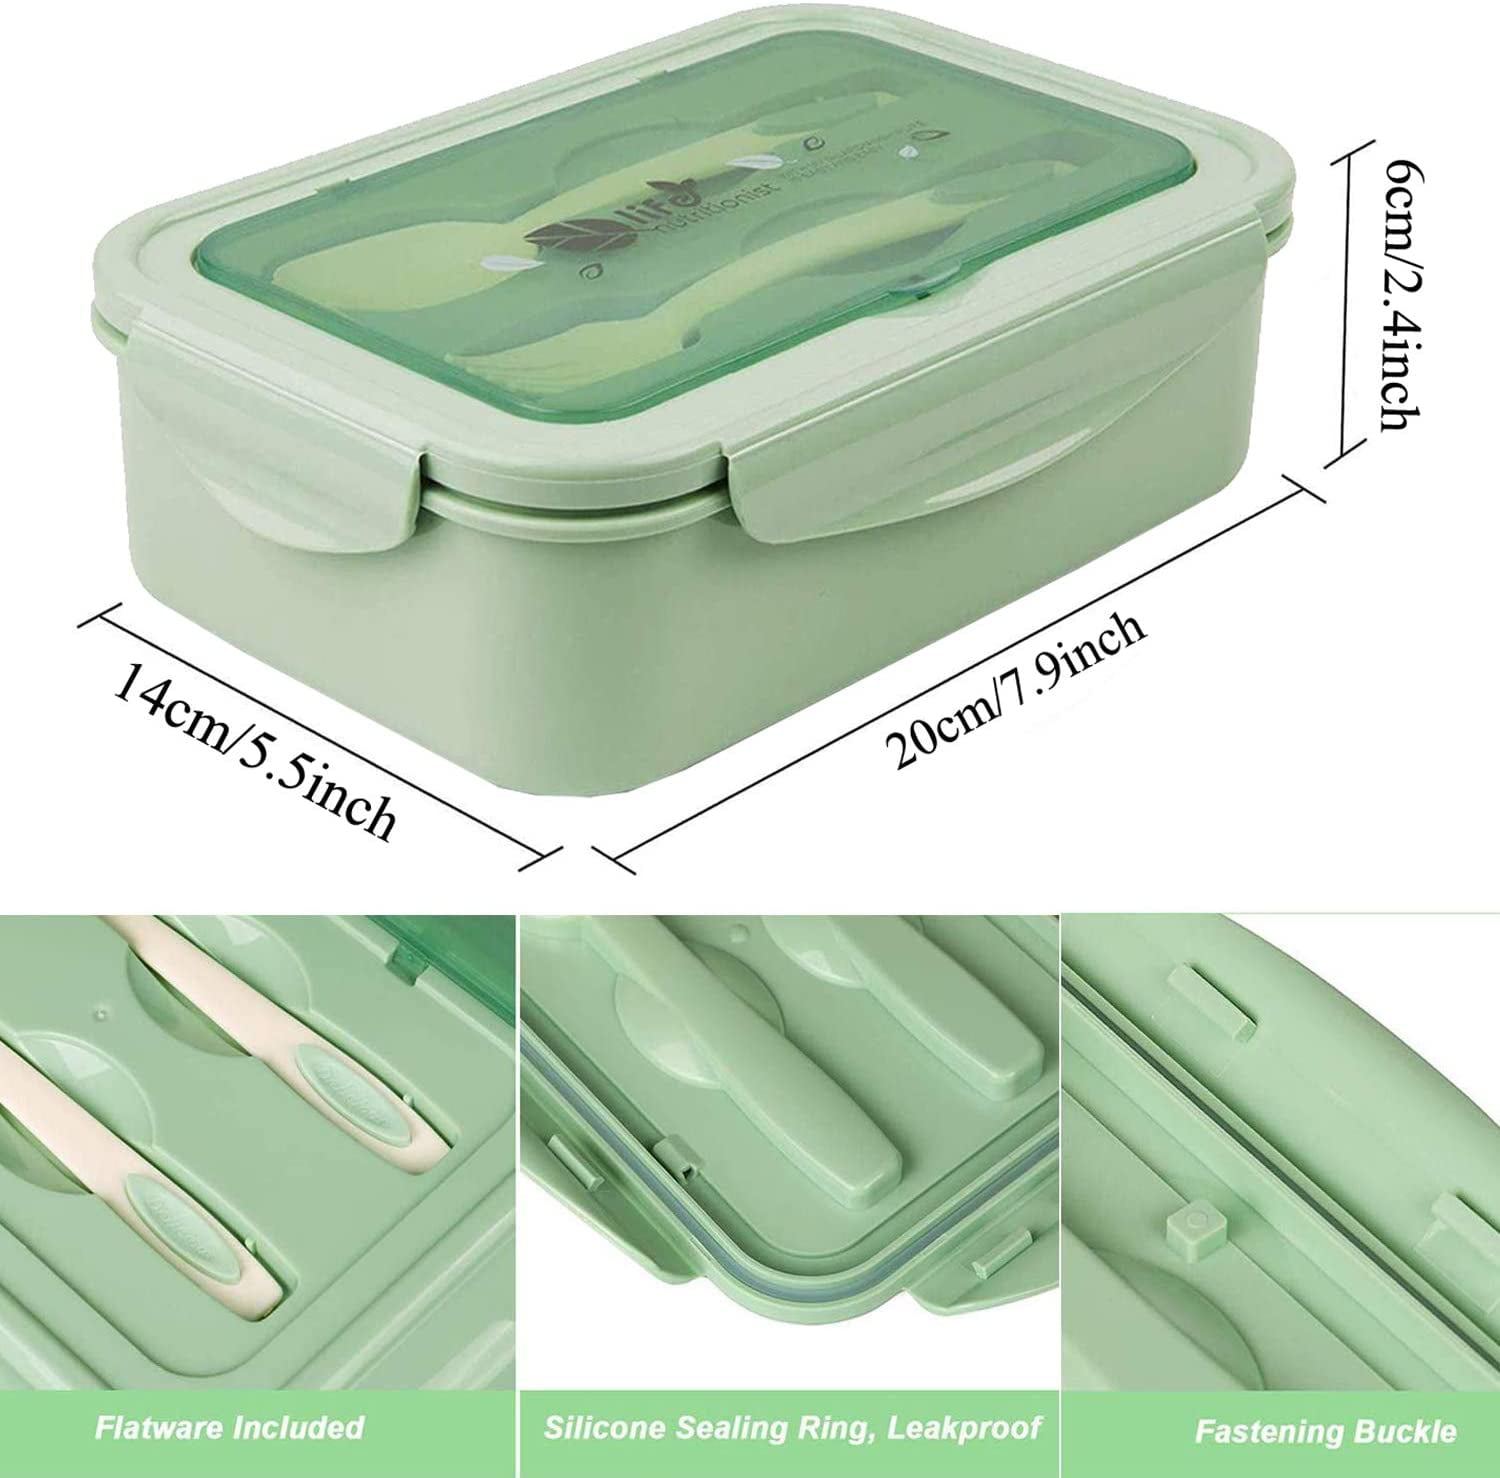 Tiitstoy Adult Lunch Box, 1000 Ml 3-Compartment Bento Lunch Box